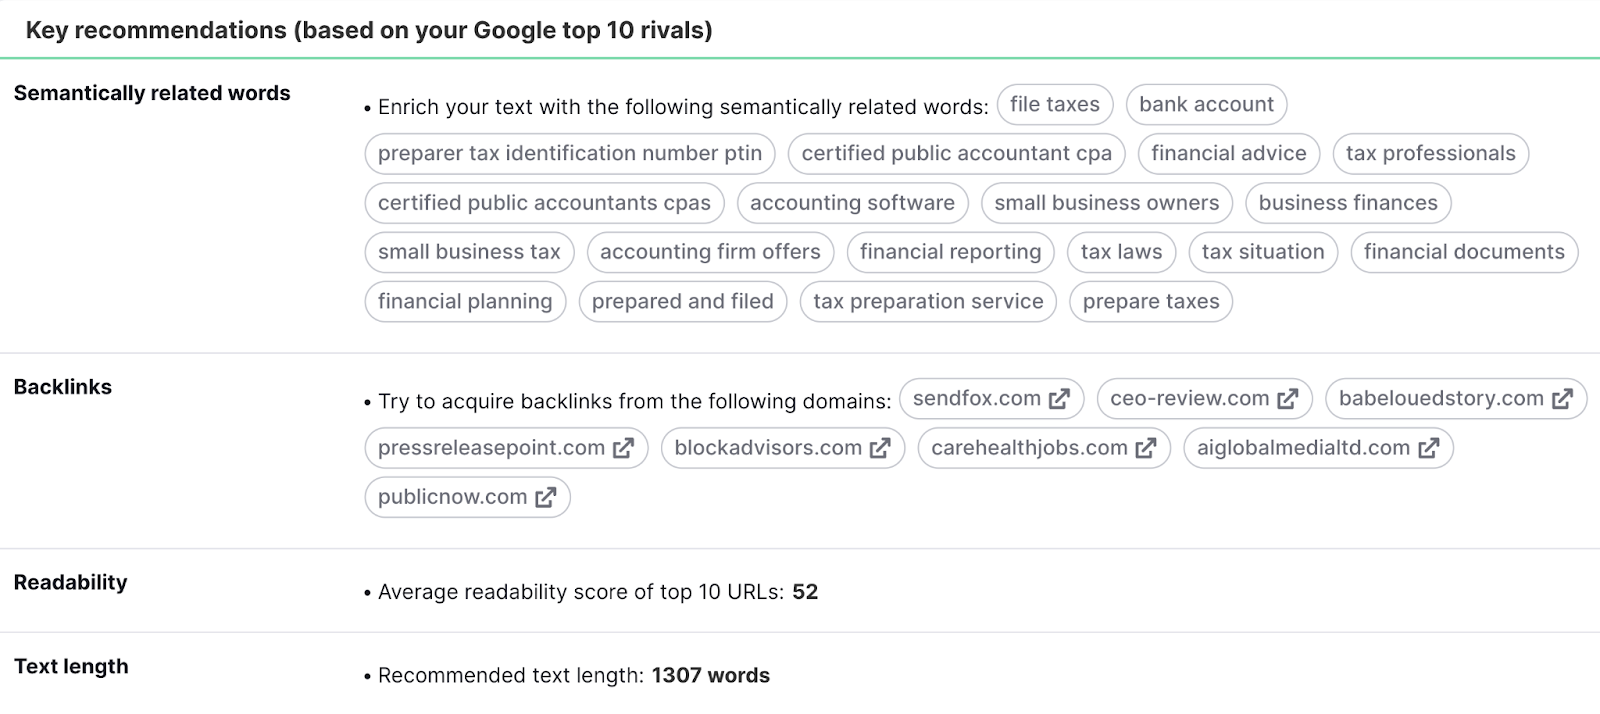 Key recommendations (based on your Google top 10 rivals) section in SEO Content Template